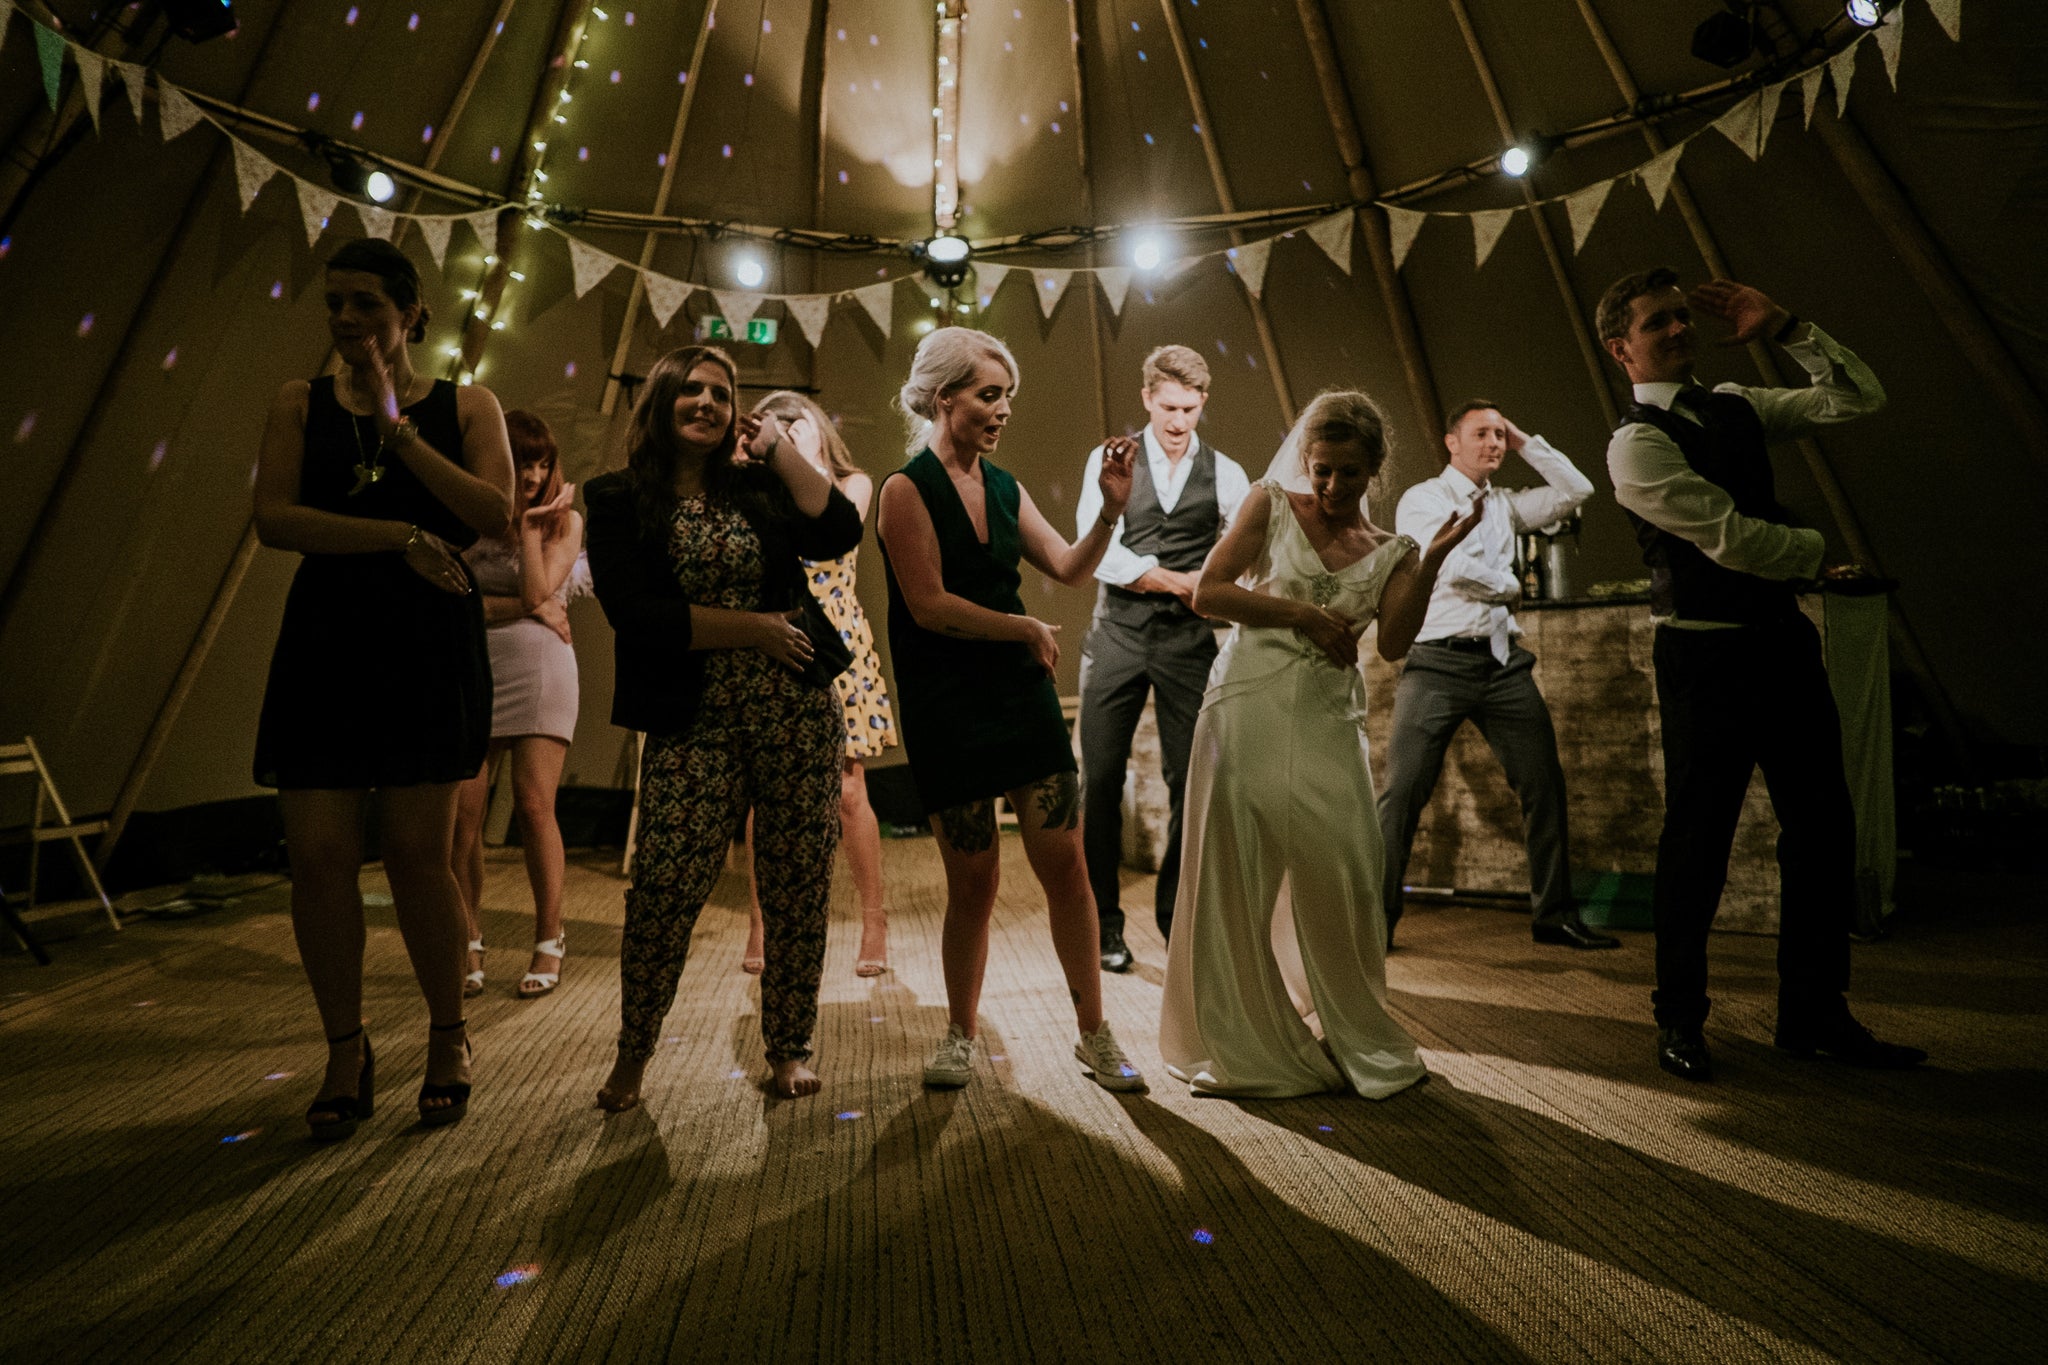 A small wedding party dancing